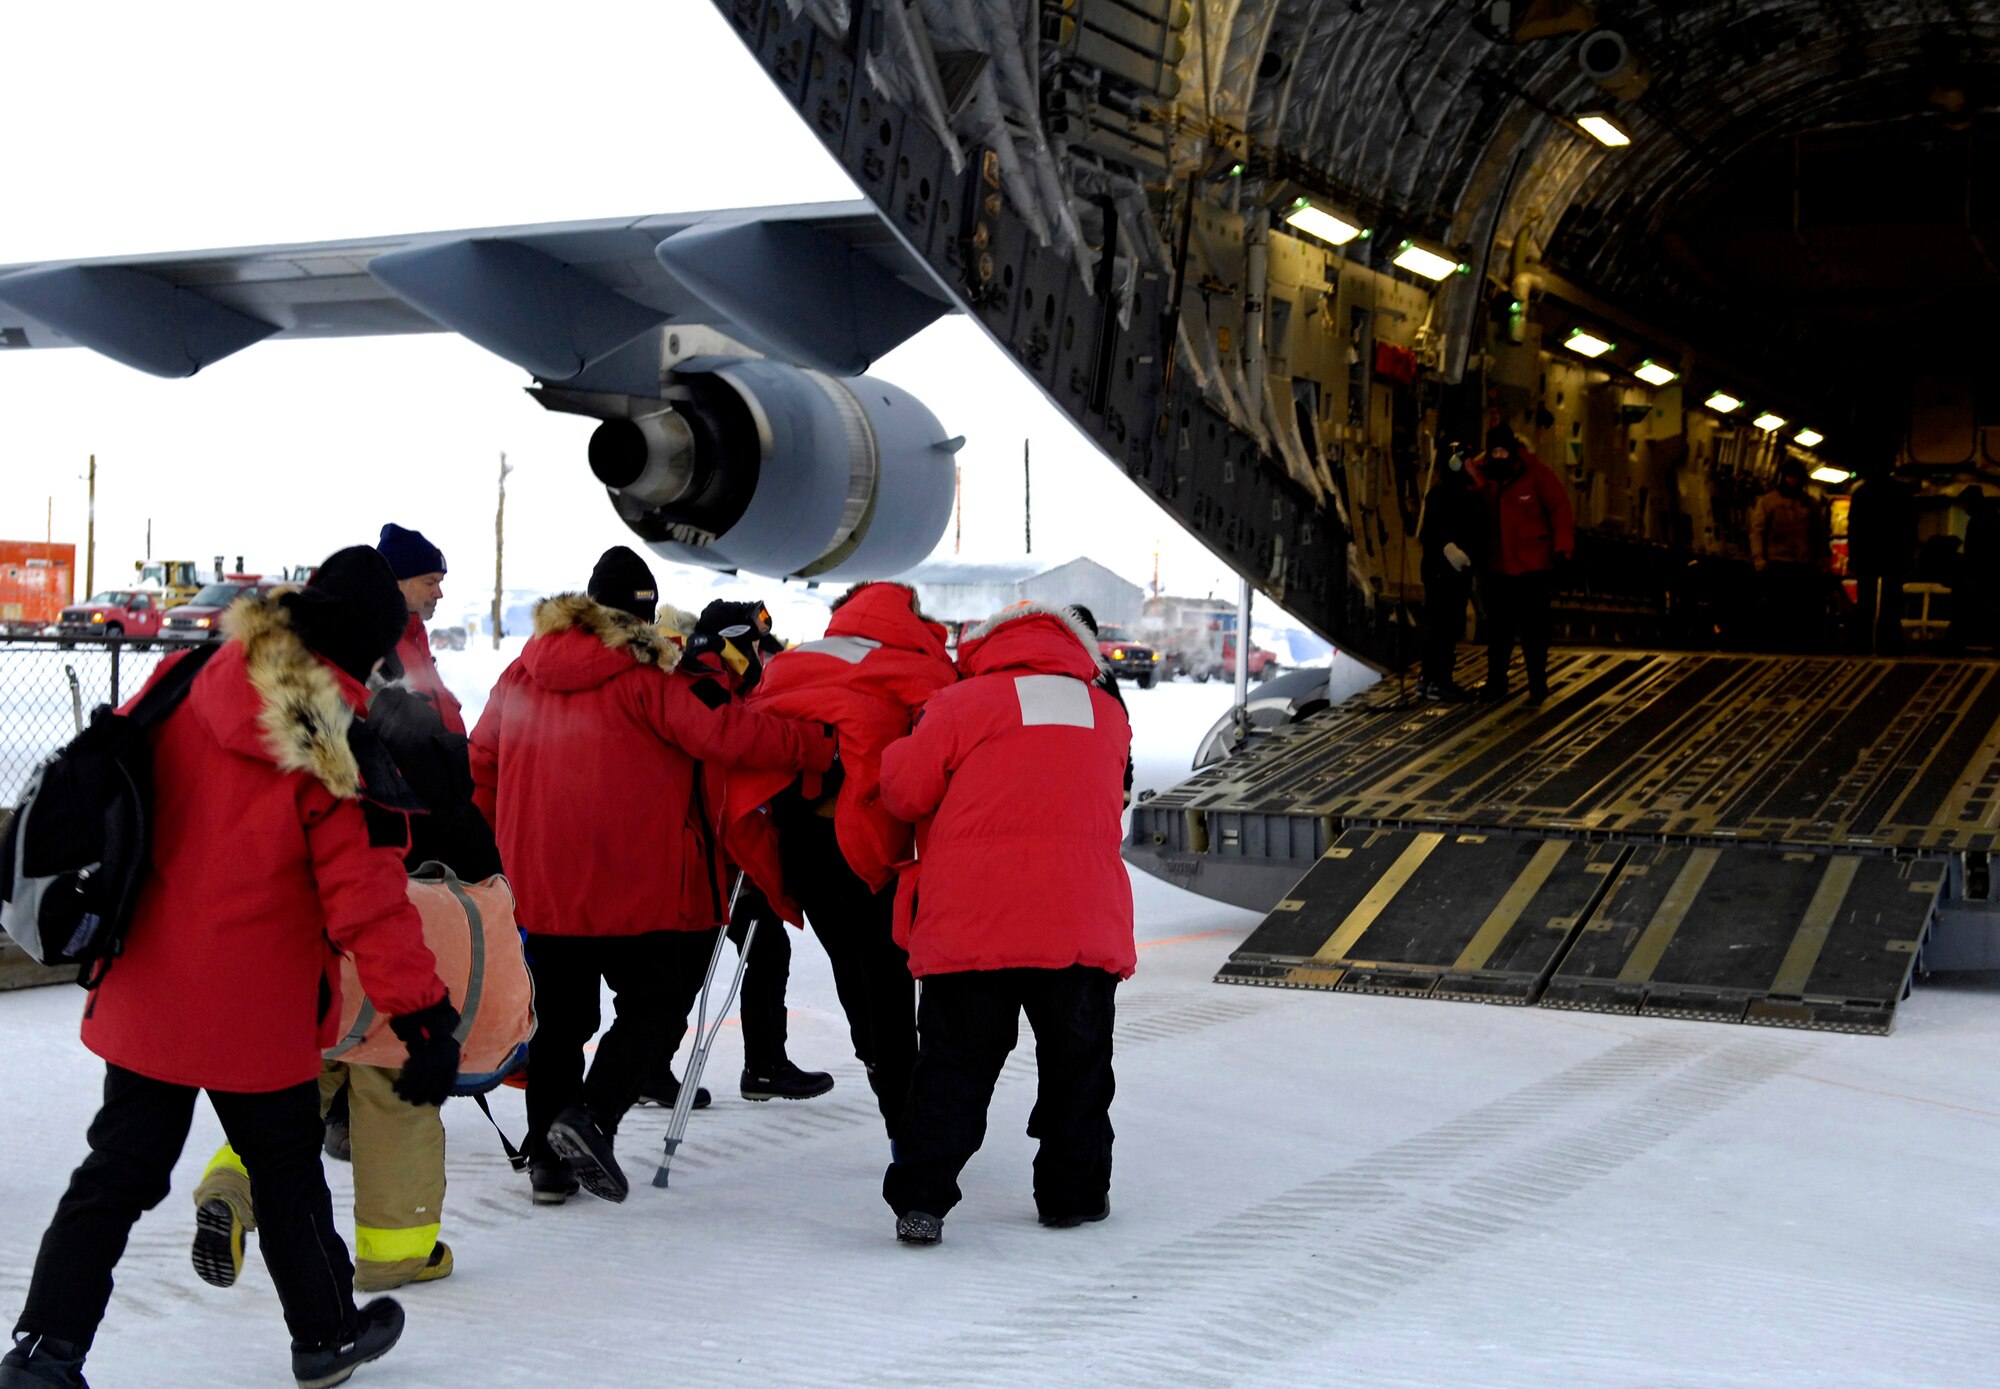 A patient is helped onto a C-17 Globemaster III Aug. 28 at Pegasus White Ice Runway, Antarctica. After completing the Operation Deep Freeze winter fly-in, a C-17 crew turned around 24 hours later and flew a medical evacuation for a patient who required more definitive medical treatment than Antarctica could handle. Also on board was a medical team from the 446th Aeromedical Evacuation Squadron from McChord Air Force Base, Wash. (U.S. Air Force photo/Tech. Sgt. Shane A. Cuomo)